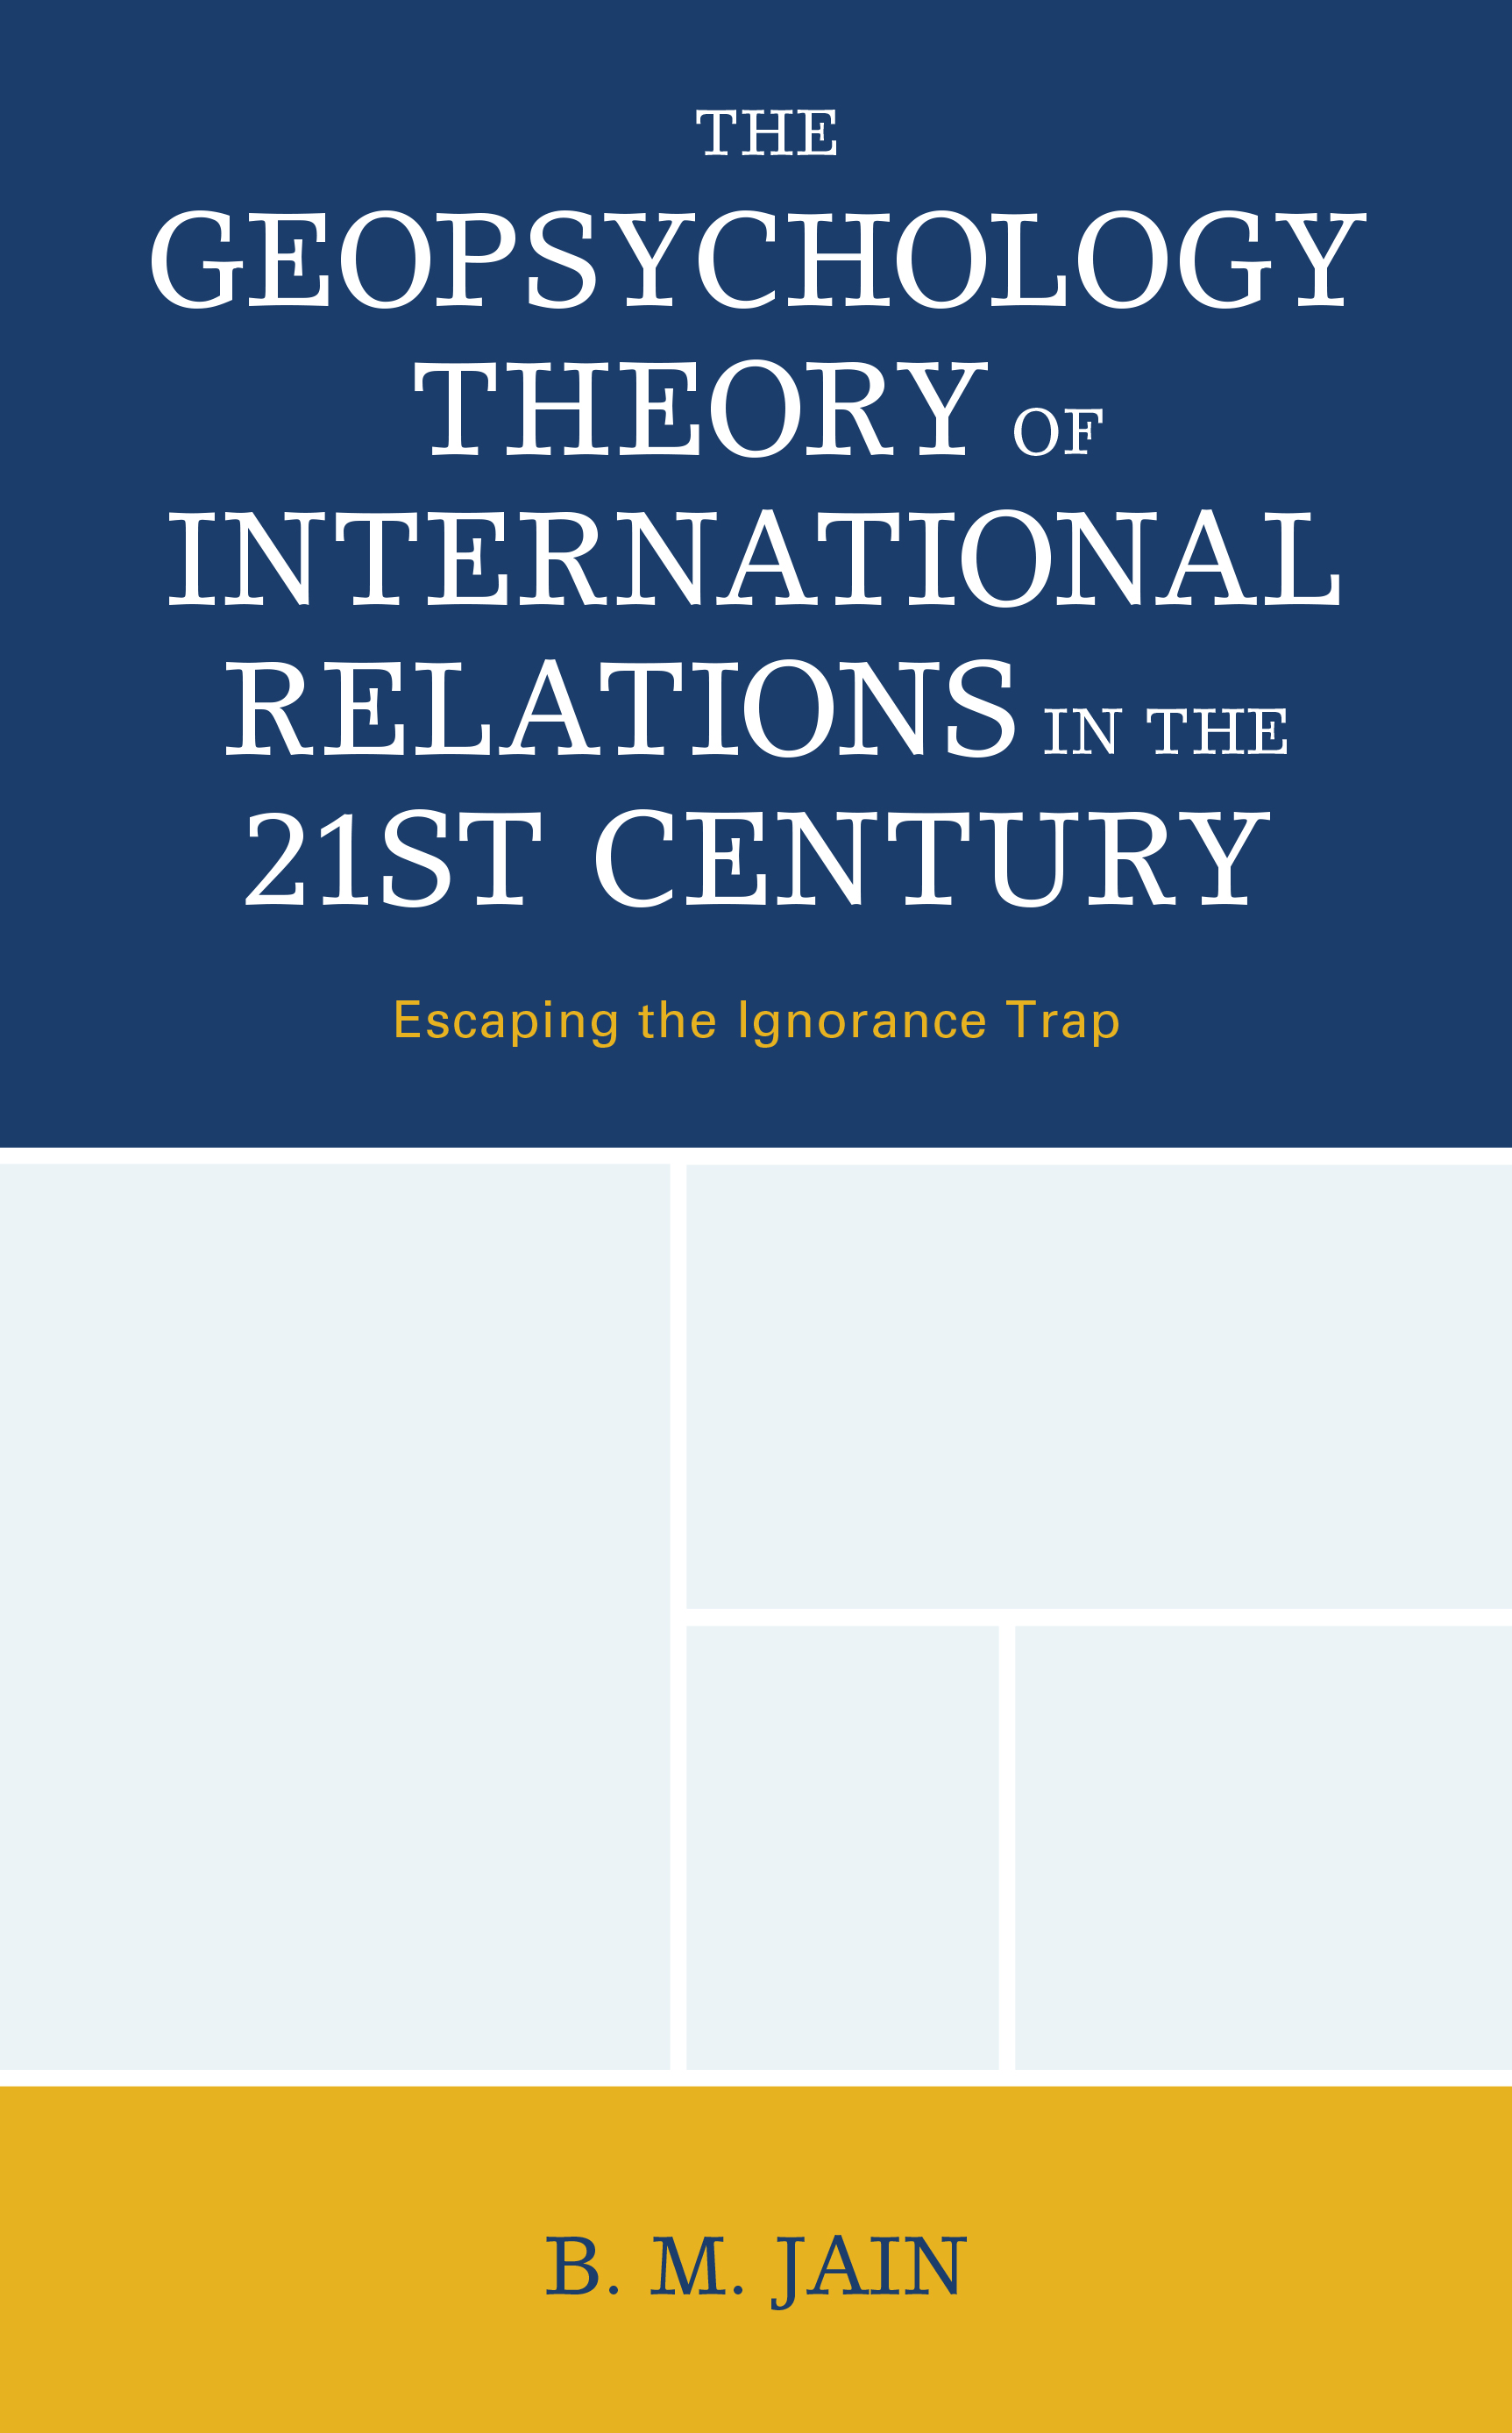 The Geopsychology Theory of International Relations in the 21st Century: Escaping the Ignorance Trap